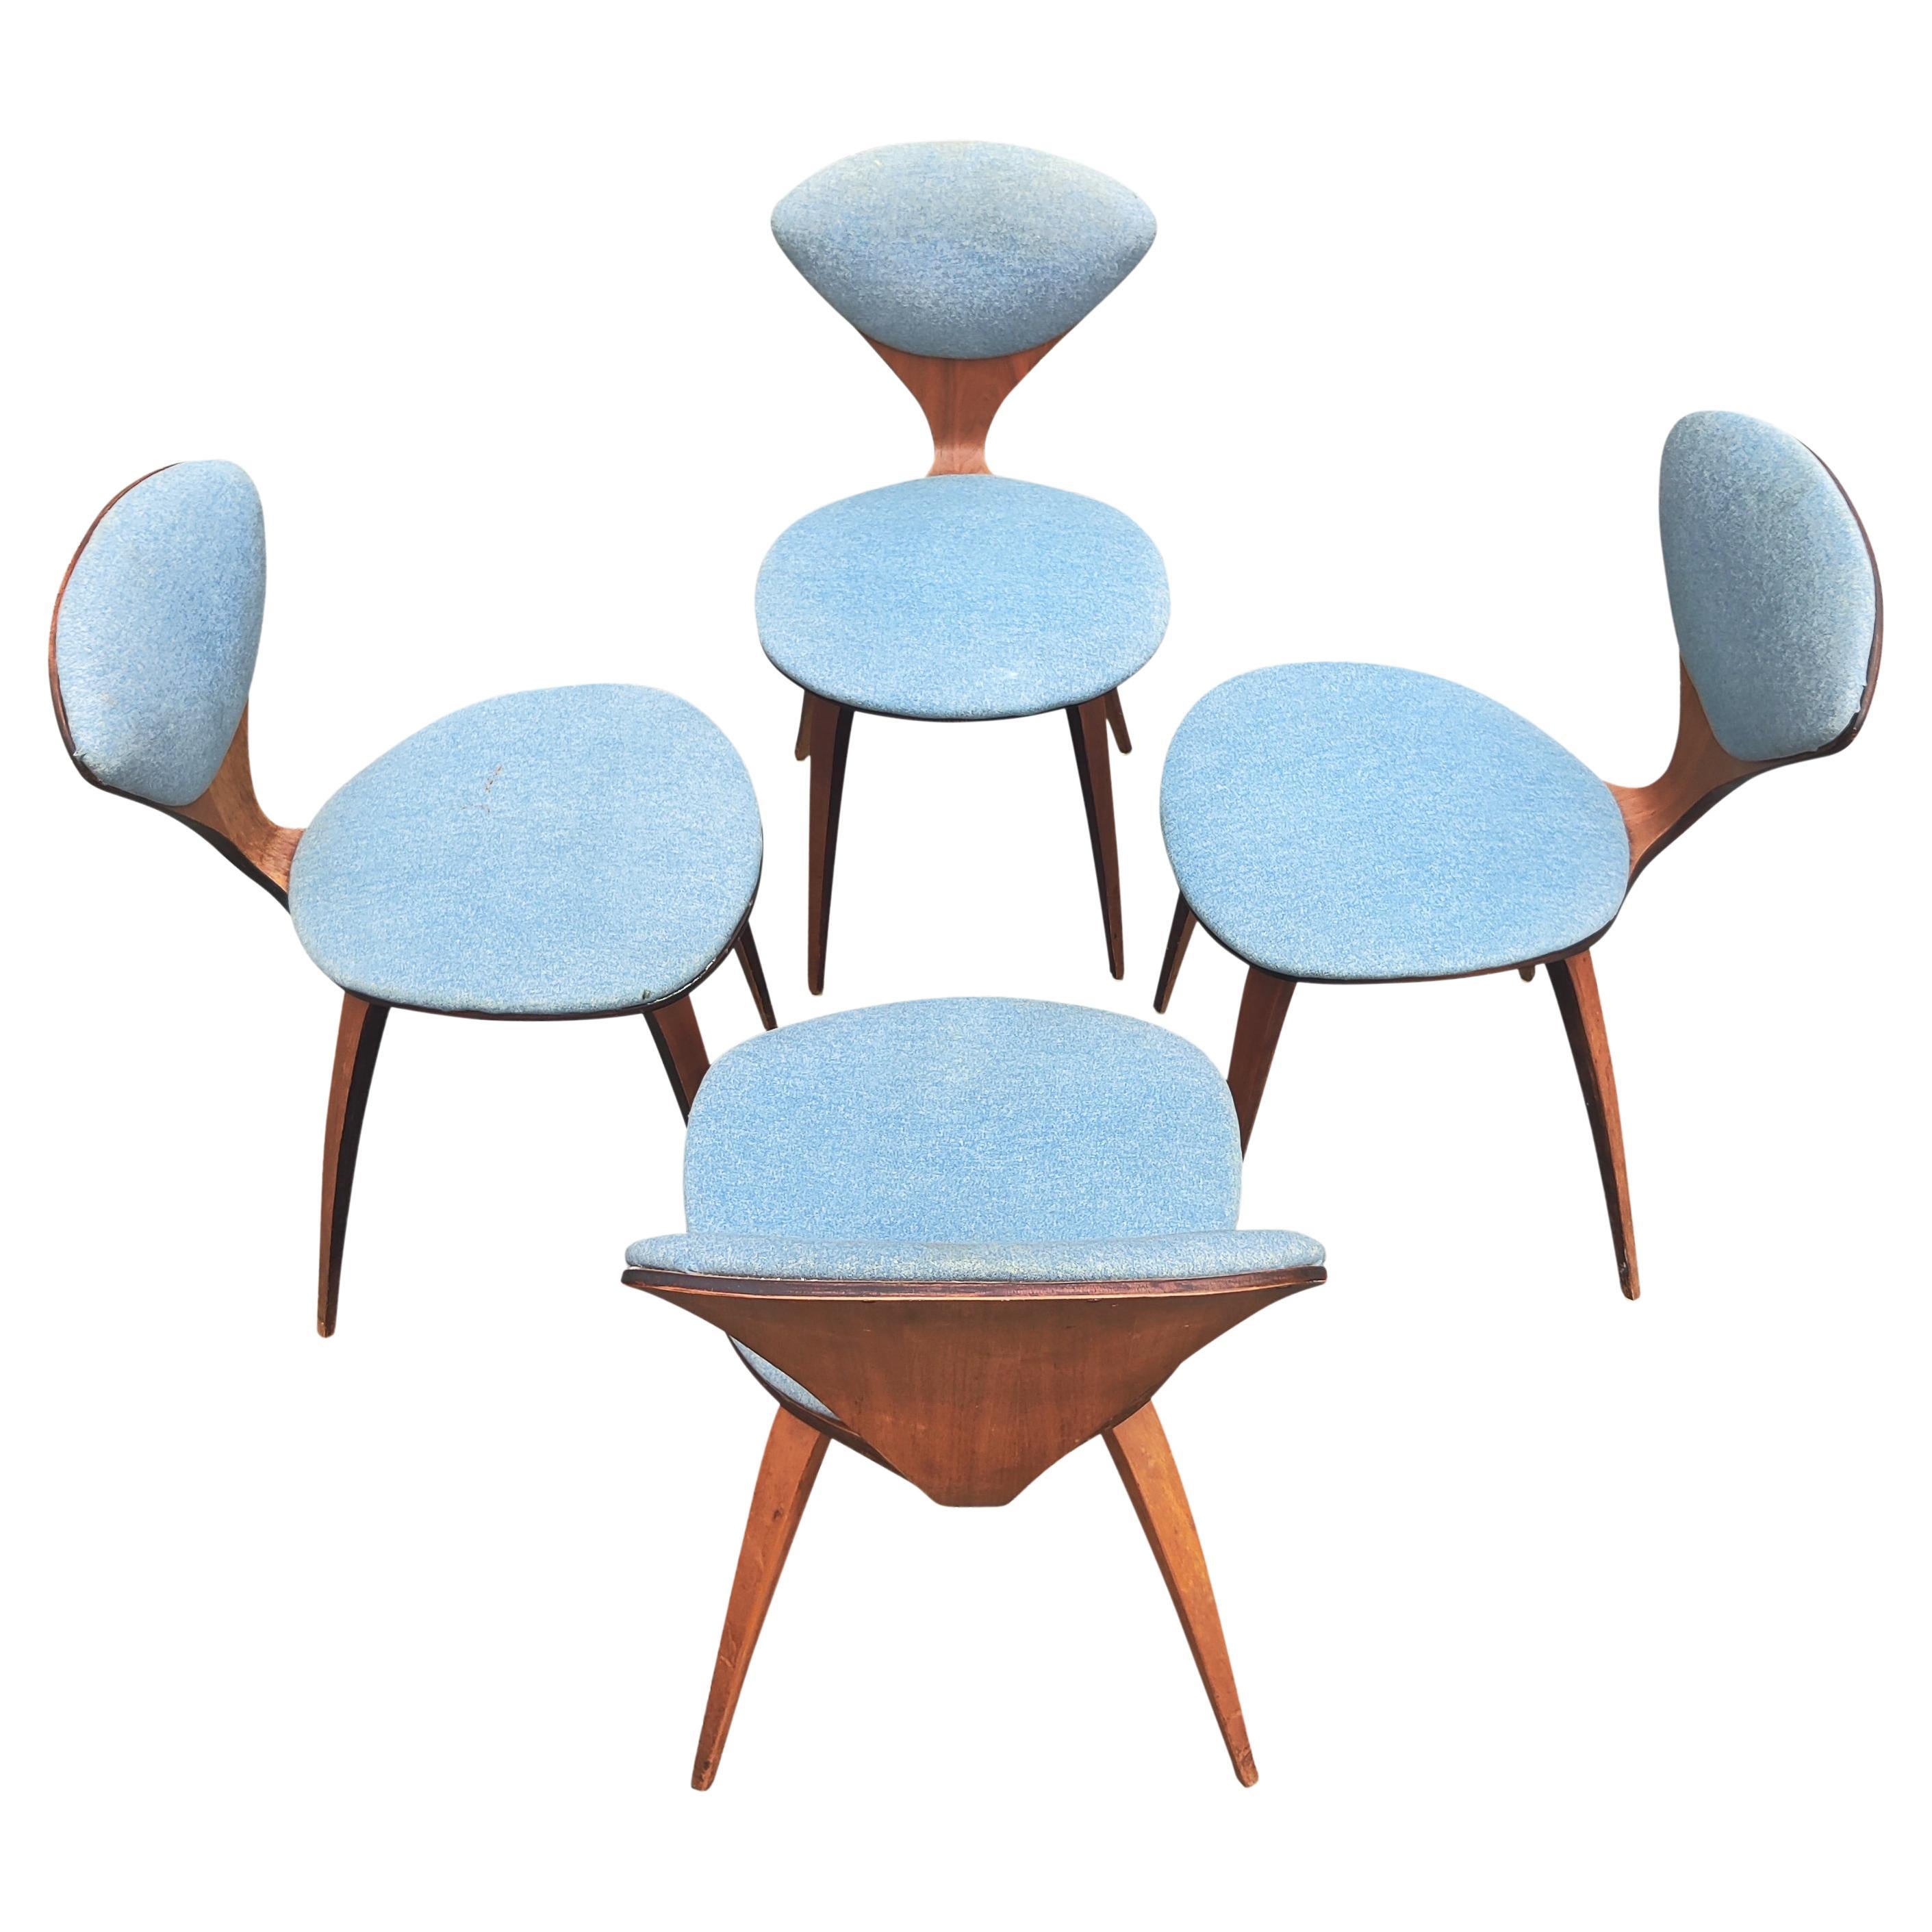 Norman Cherner Plycraft 1965 Walnut Upholstery Set, Four '4' chairs MCM Classic